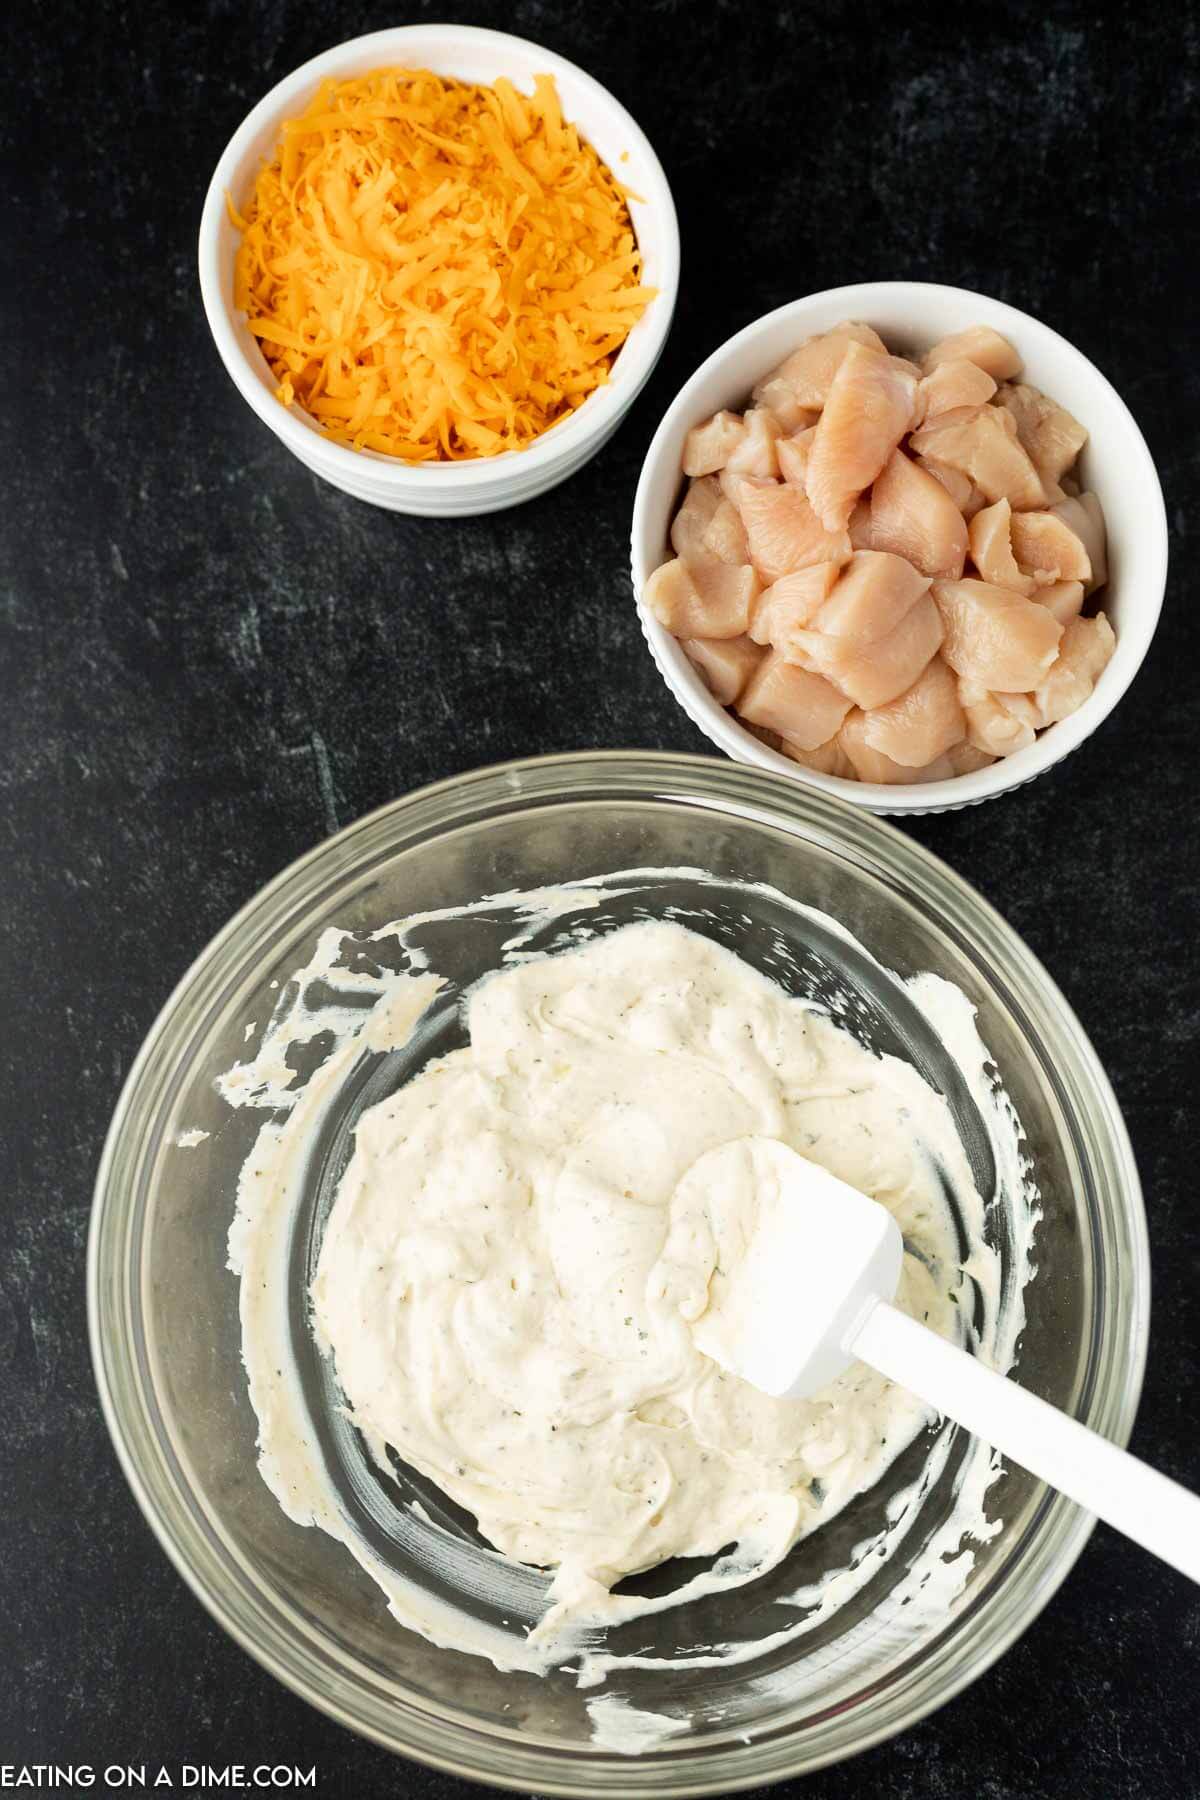 Mixing together the cream cheese, sour cream with a bowl of cheese and diced chicken on the side